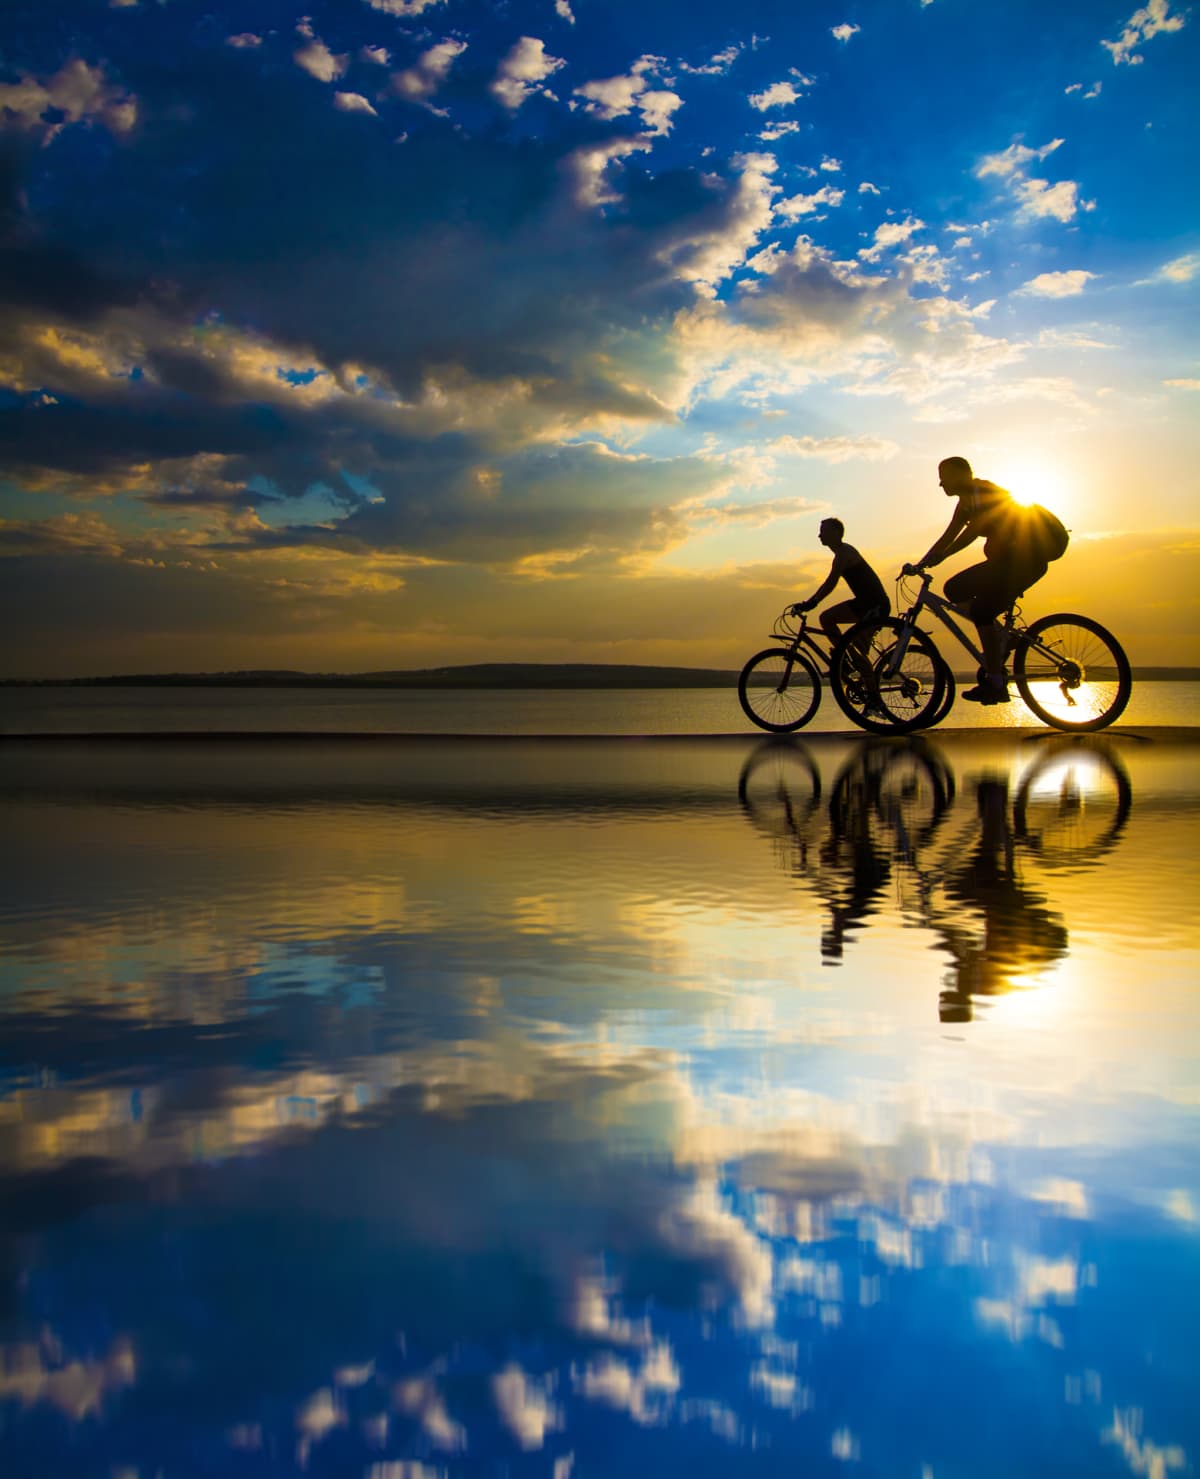 Two people riding bikes on the beach